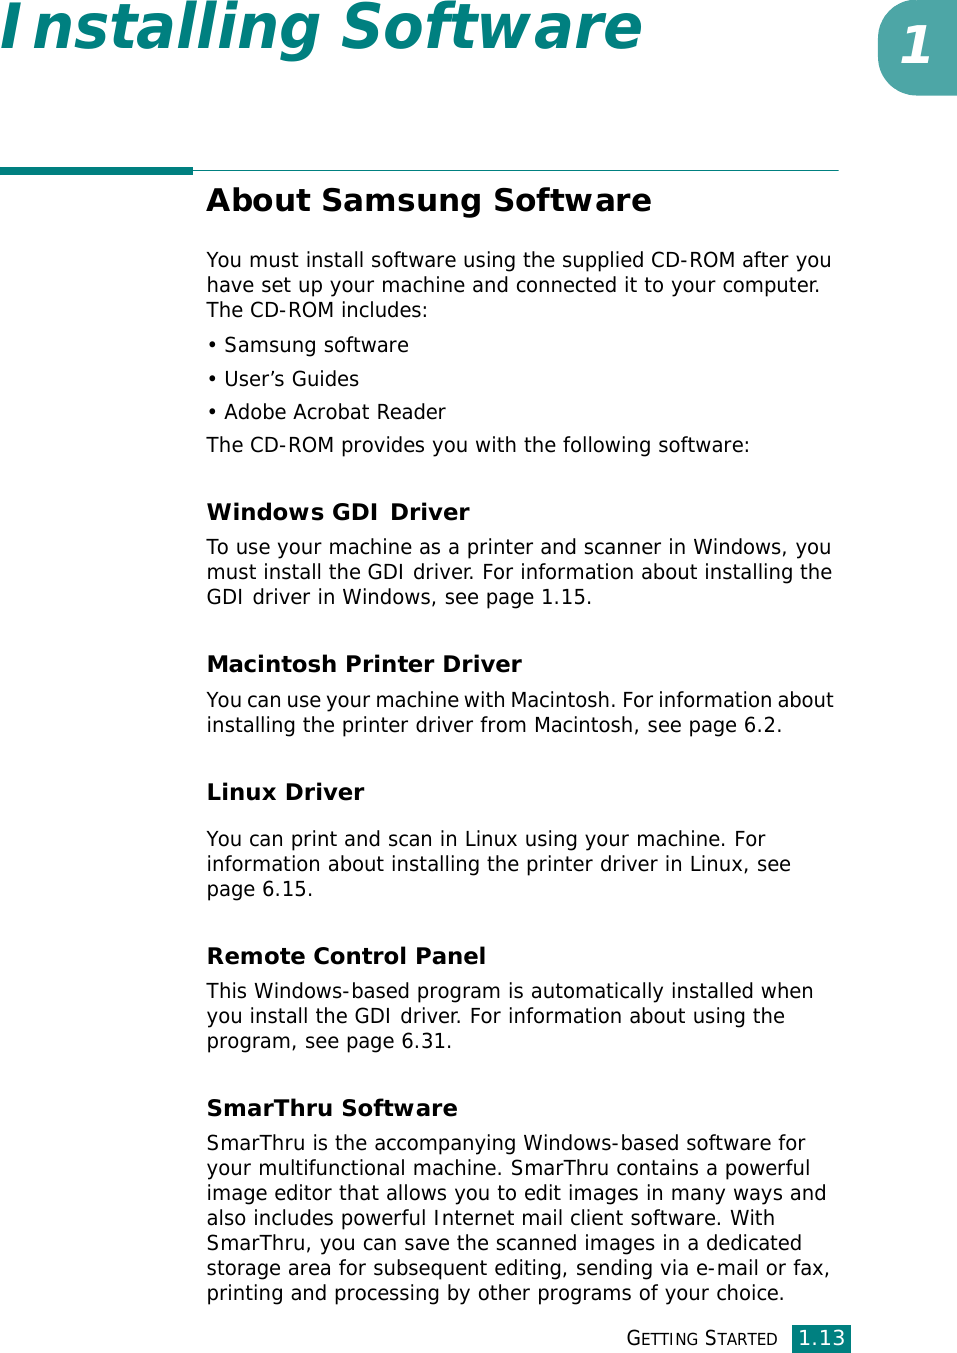 GETTING STARTED1.131Installing SoftwareAbout Samsung SoftwareYou must install software using the supplied CD-ROM after you have set up your machine and connected it to your computer. The CD-ROM includes:• Samsung software• User’s Guides• Adobe Acrobat ReaderThe CD-ROM provides you with the following software:Windows GDI Driver To use your machine as a printer and scanner in Windows, you must install the GDI driver. For information about installing the GDI driver in Windows, see page 1.15.Macintosh Printer DriverYou can use your machine with Macintosh. For information about installing the printer driver from Macintosh, see page 6.2.Linux DriverYou can print and scan in Linux using your machine. For information about installing the printer driver in Linux, see page 6.15. Remote Control PanelThis Windows-based program is automatically installed when you install the GDI driver. For information about using the program, see page 6.31.SmarThru SoftwareSmarThru is the accompanying Windows-based software for your multifunctional machine. SmarThru contains a powerful image editor that allows you to edit images in many ways and also includes powerful Internet mail client software. With SmarThru, you can save the scanned images in a dedicated storage area for subsequent editing, sending via e-mail or fax, printing and processing by other programs of your choice.